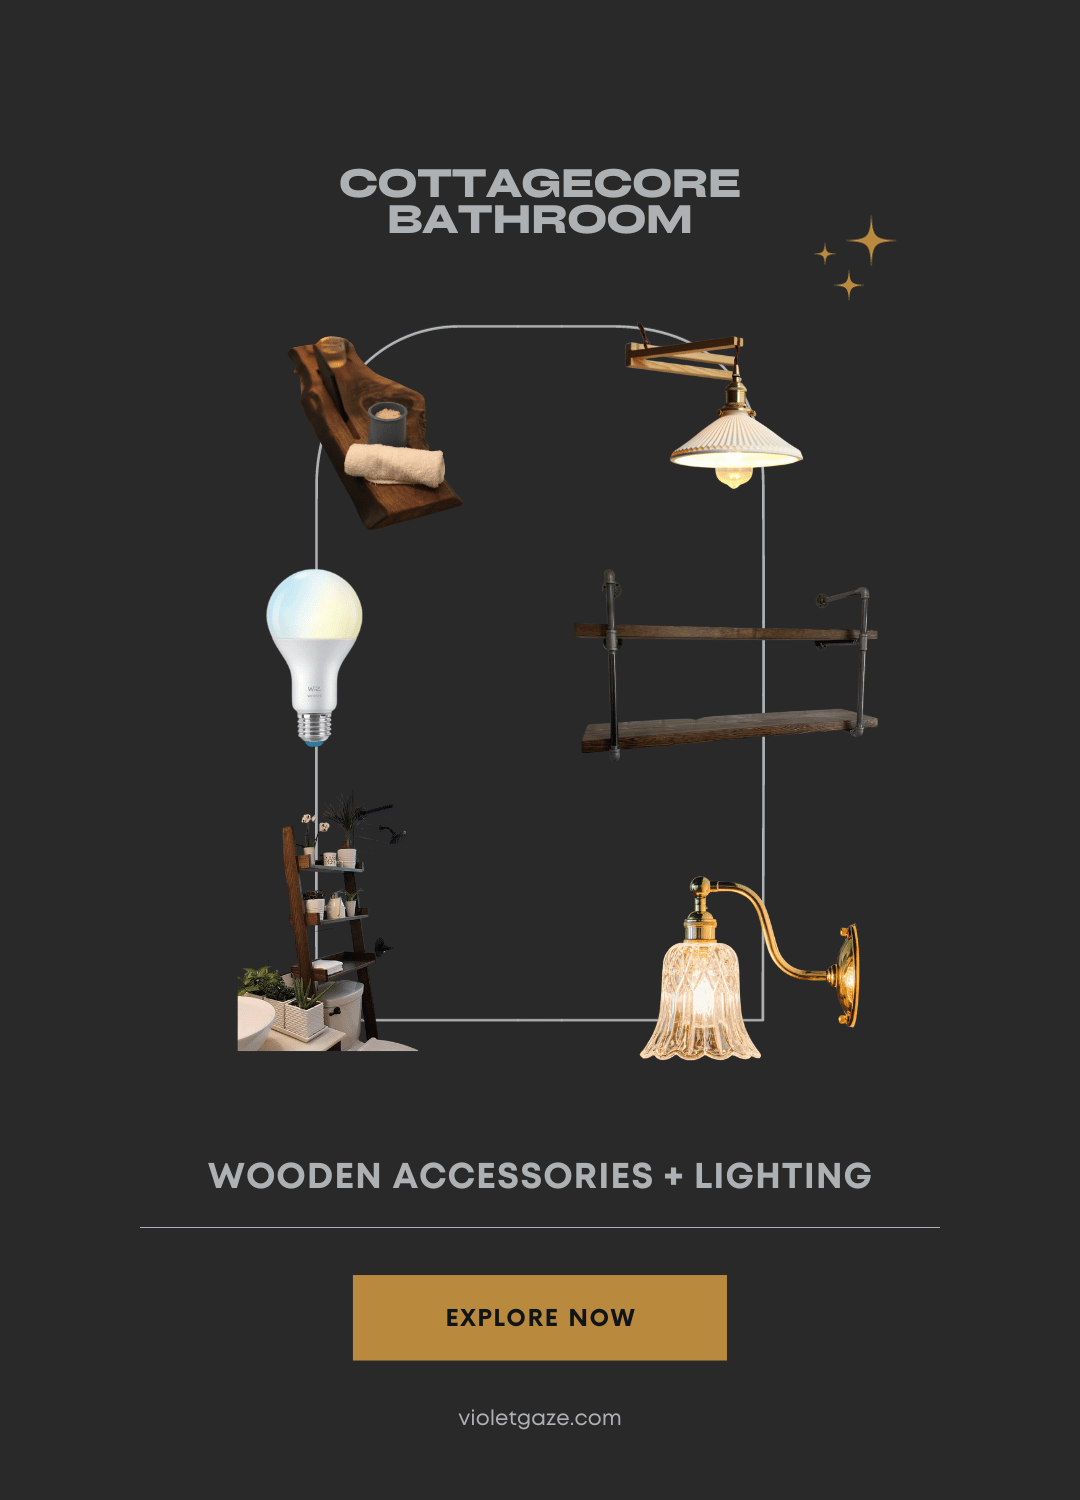 cottagecore bathroom wooden accessories and lighting